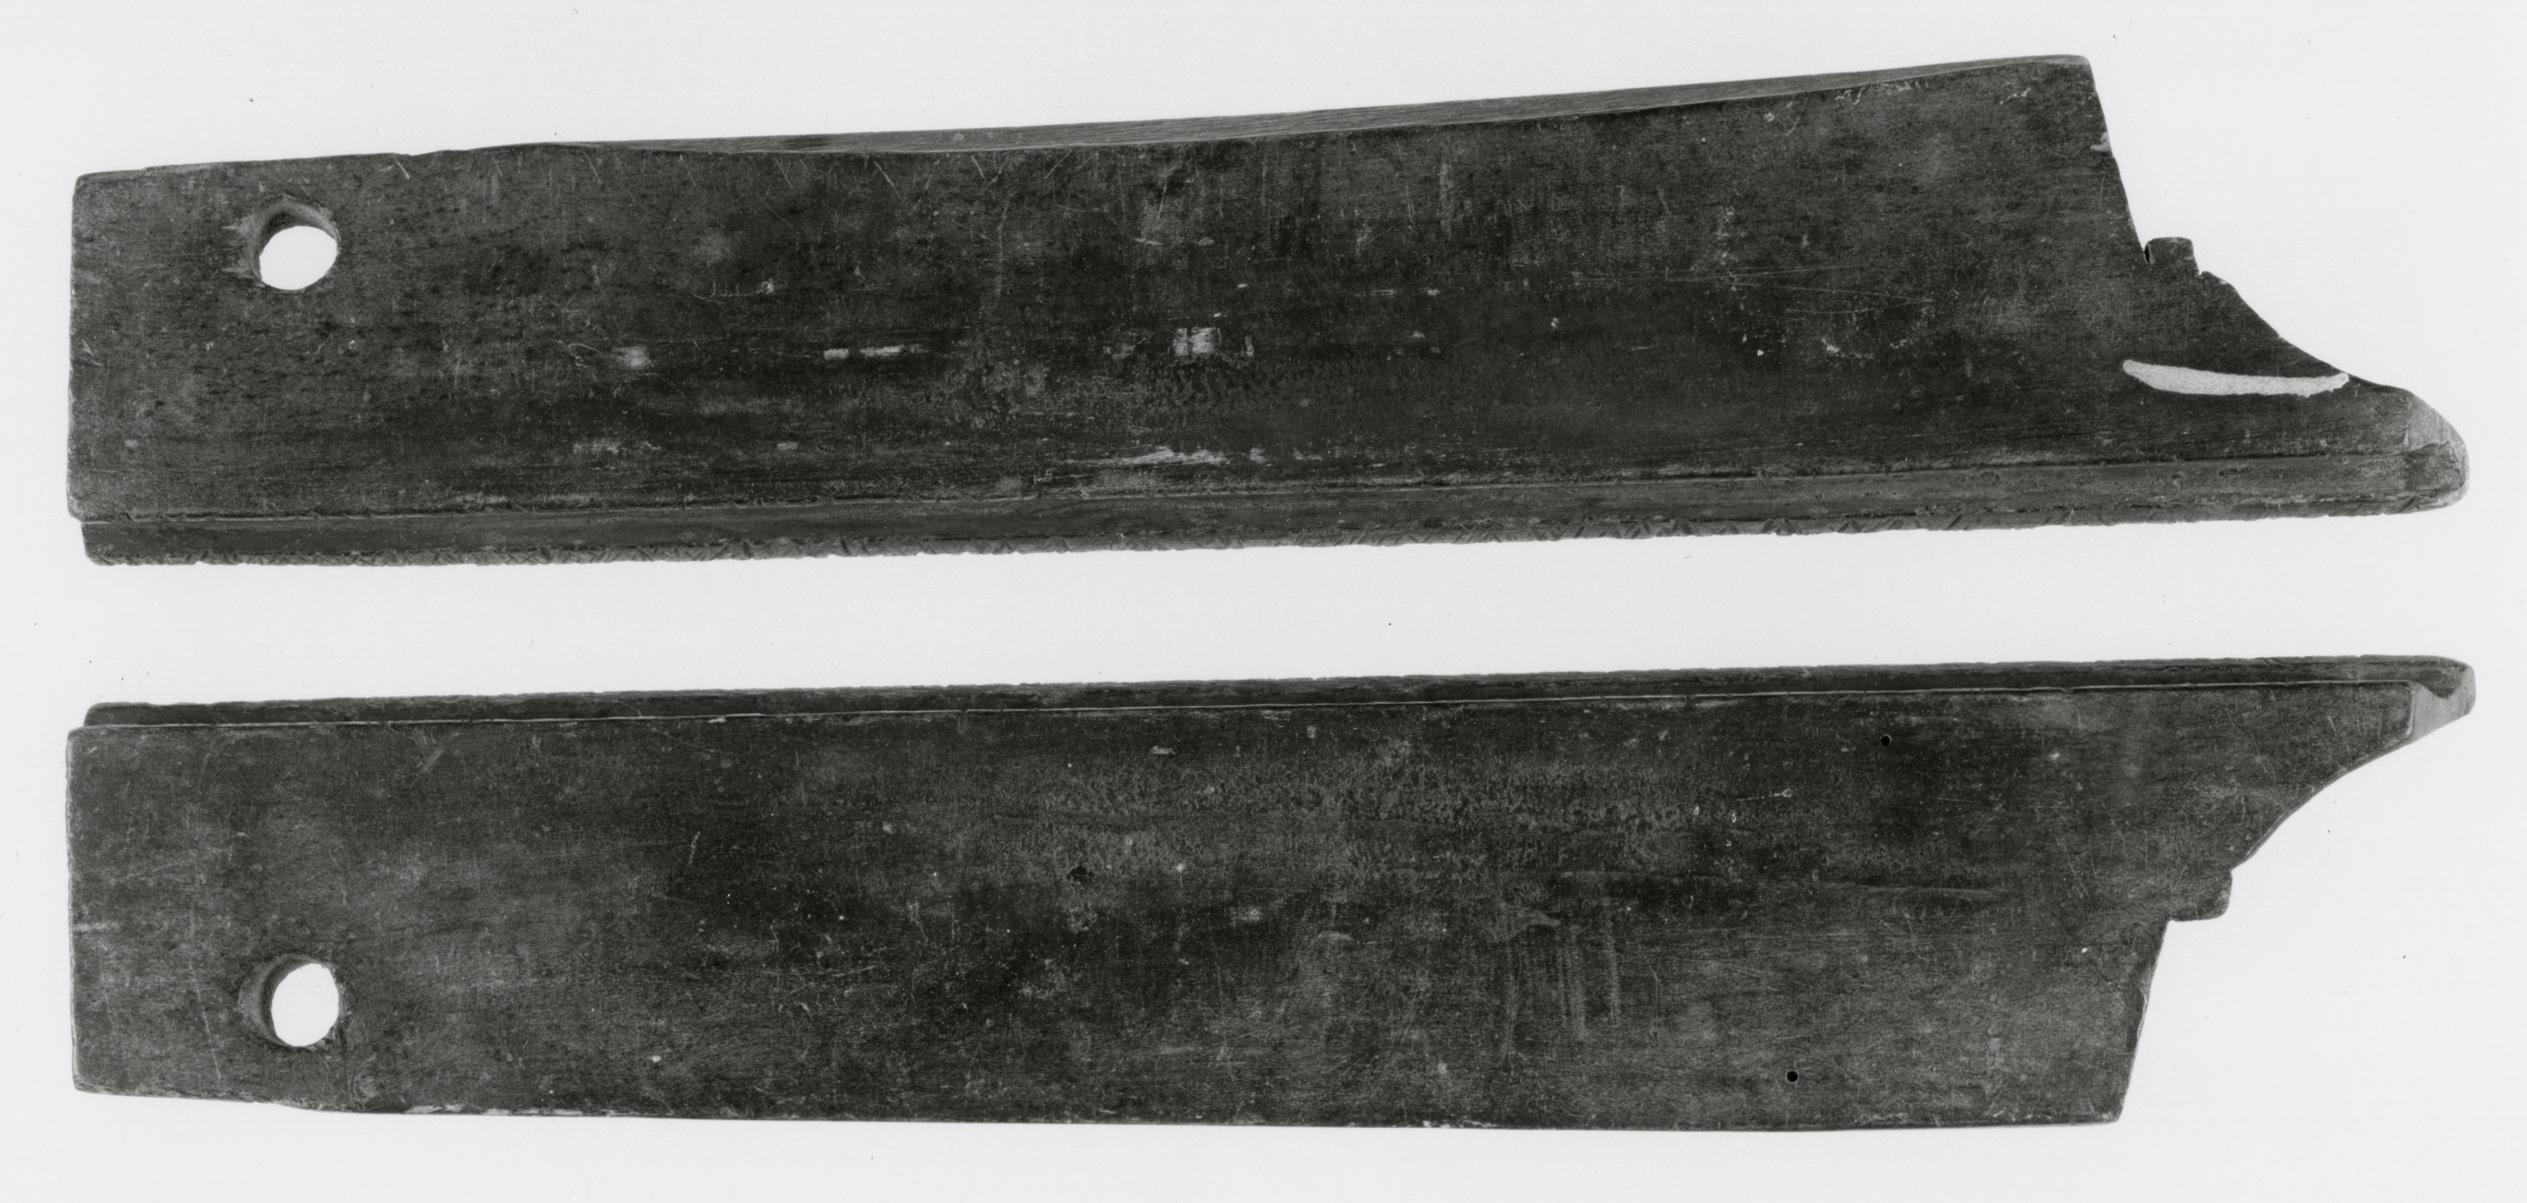 Black and white photograph of saw clamps or whetting blocks.